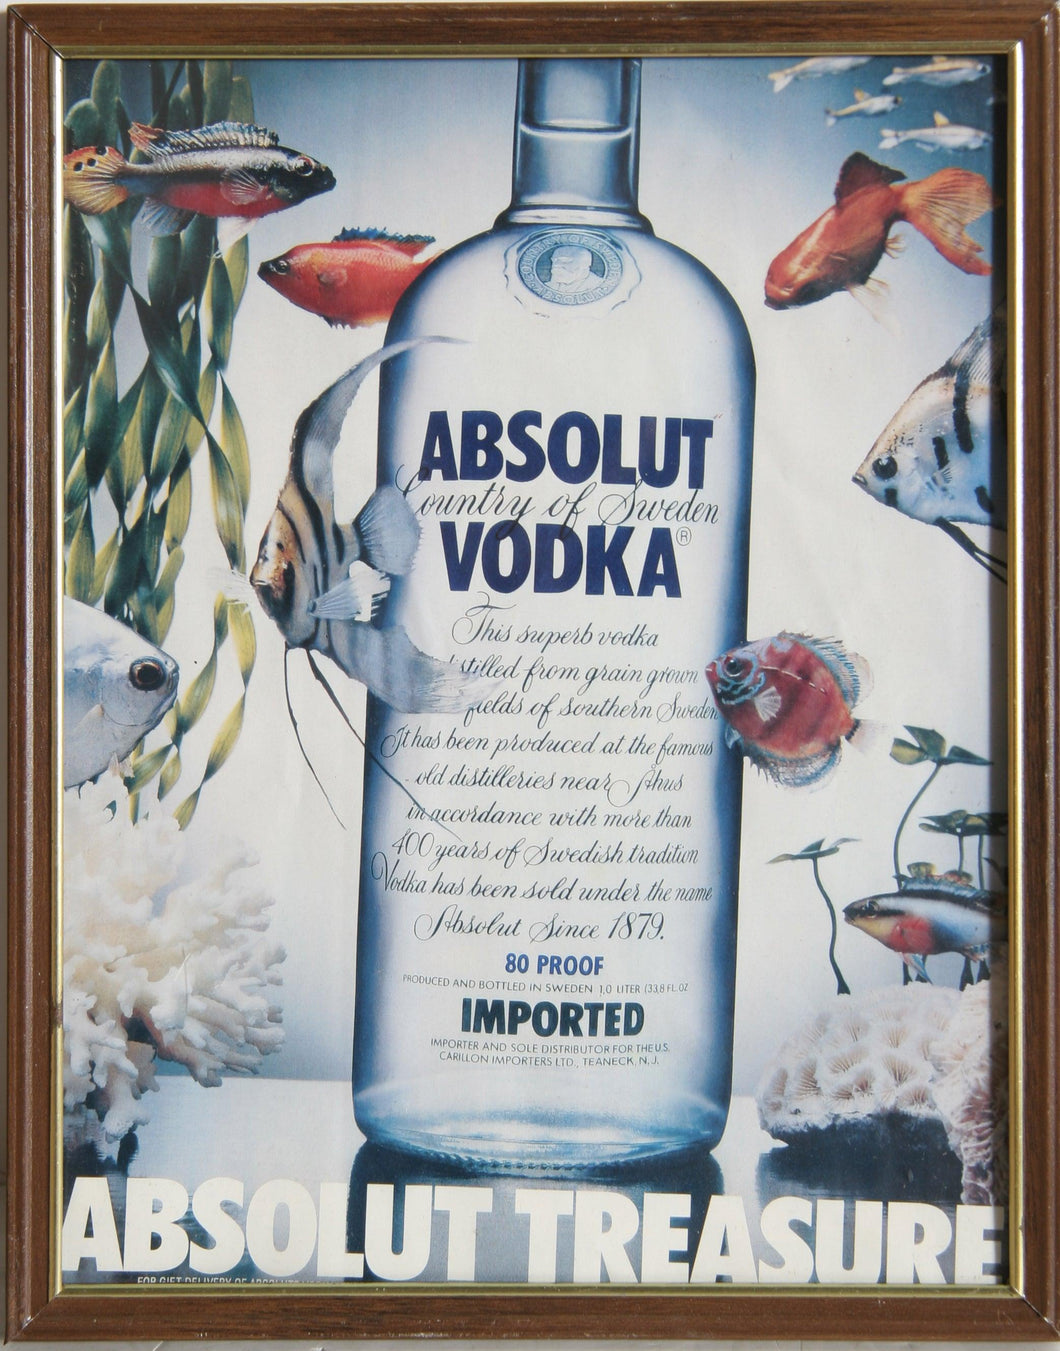 Absolut Vodka - Absolut Treasure Poster | Unknown Artist,{{product.type}}